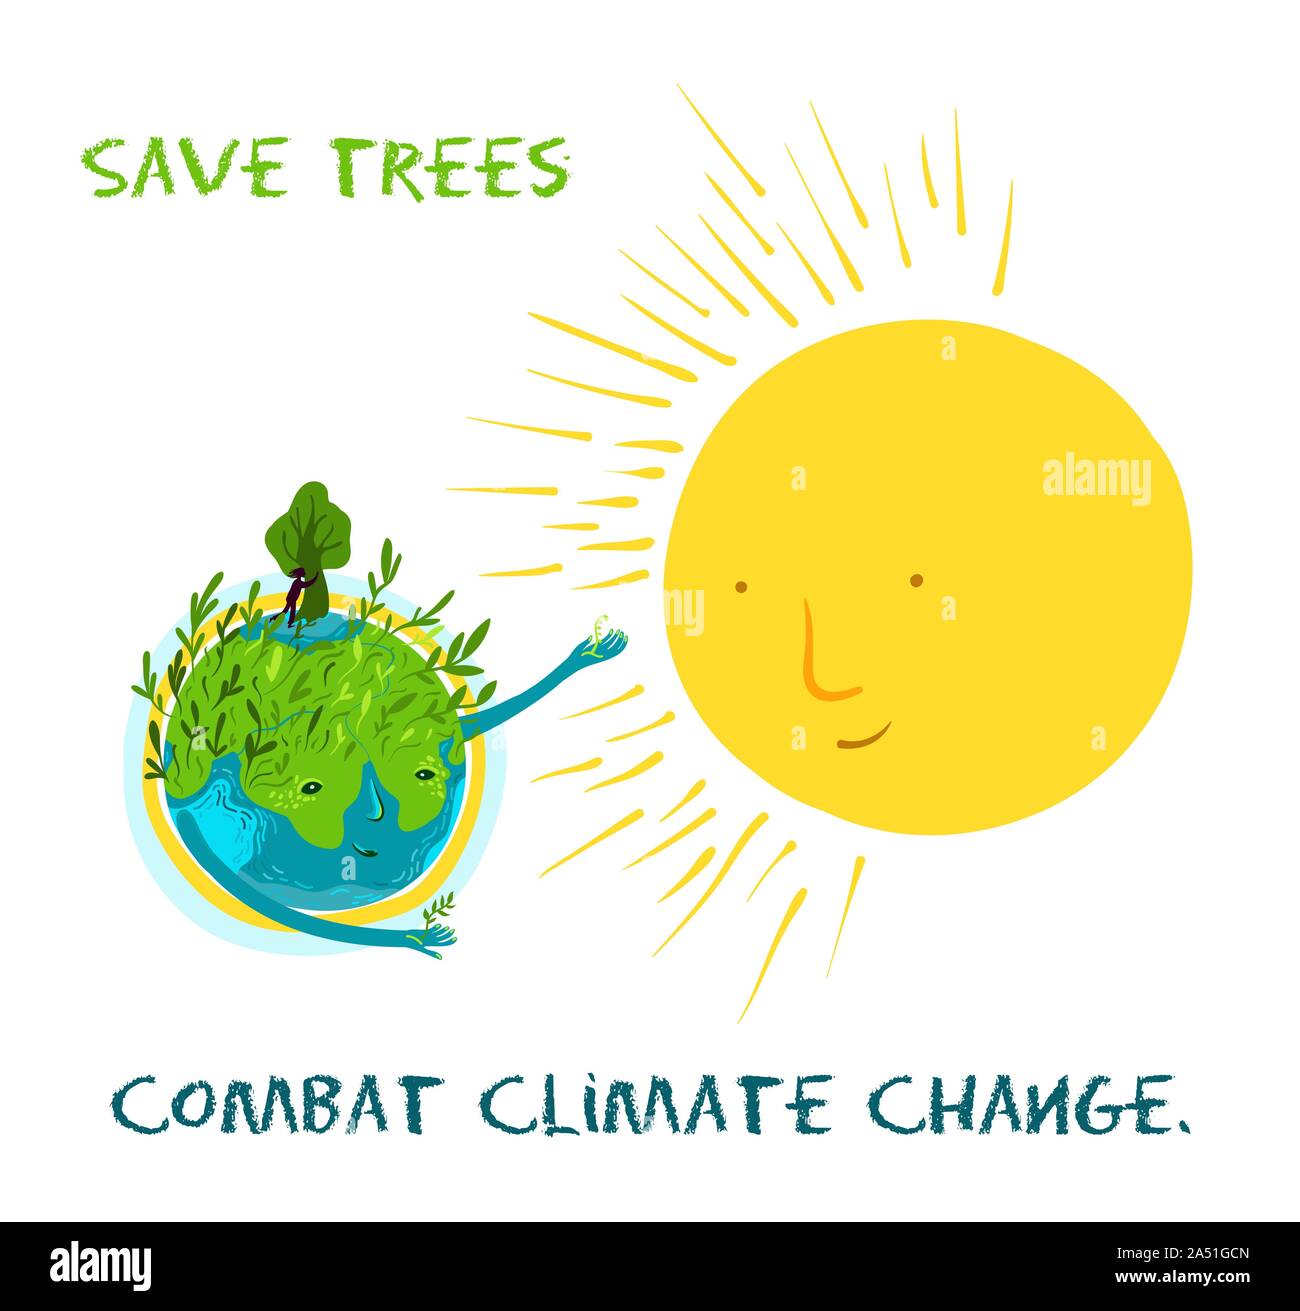 Save trees, combat climate change. Vector ecological illustration about the conservation of trees and plants on planet Earth. Cute character, conceptu Stock Vector